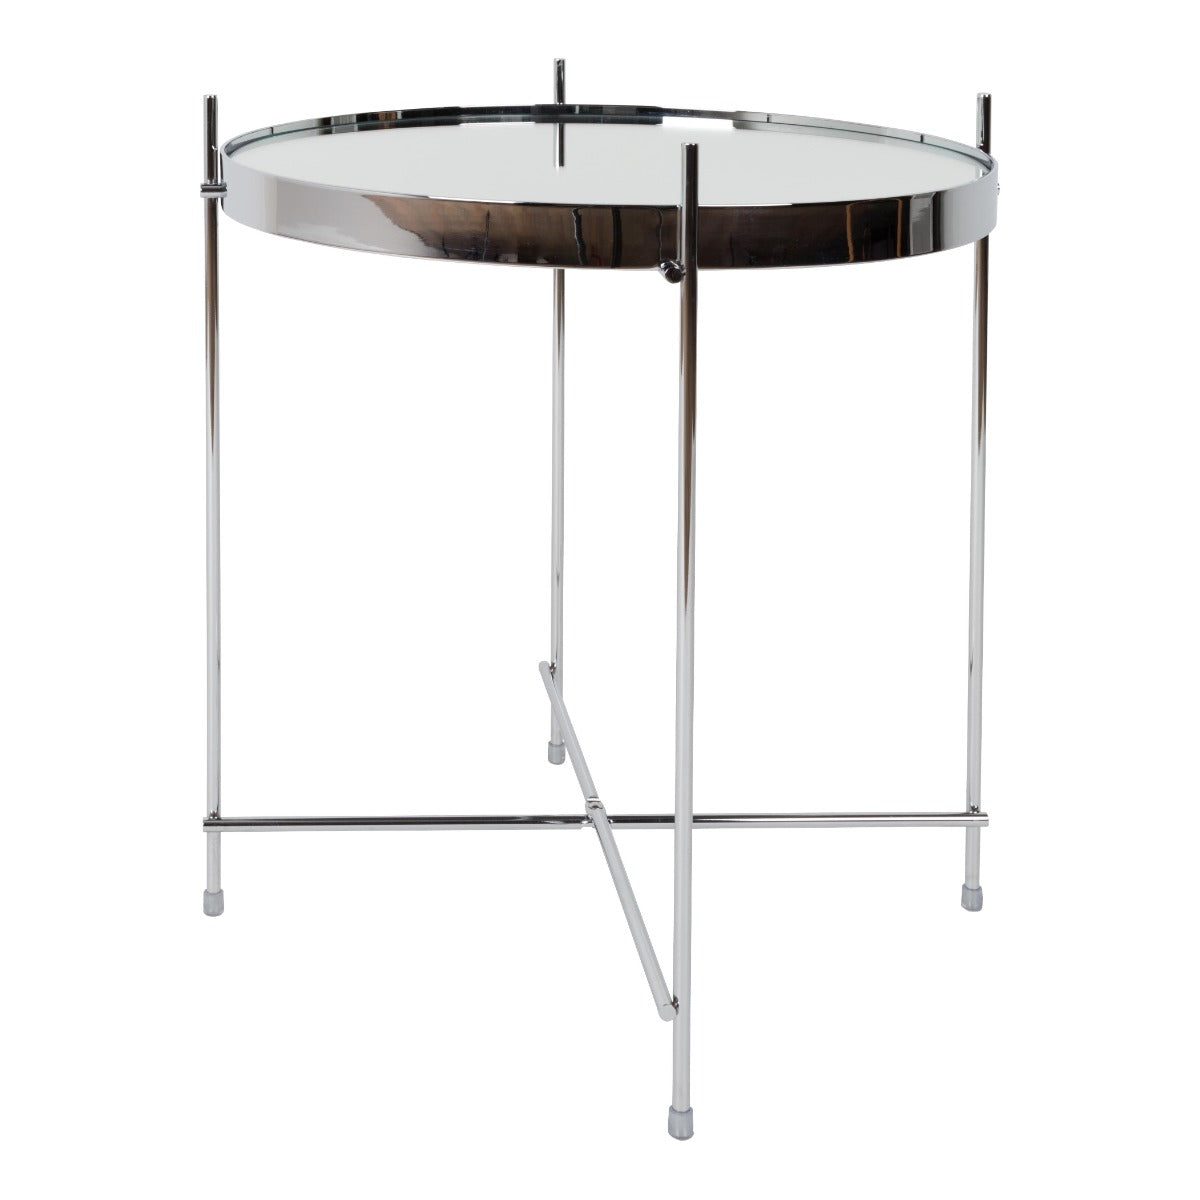 The Cupid table is versatile in terms of style, decoration options and general use. It owes this thanks to its simple shapes, through which it works in both a modern and minimalist living room. A metal frame painted with a powder method for color that maintains a glass top. The whole kept in a shiny finish gives elegance to any room.